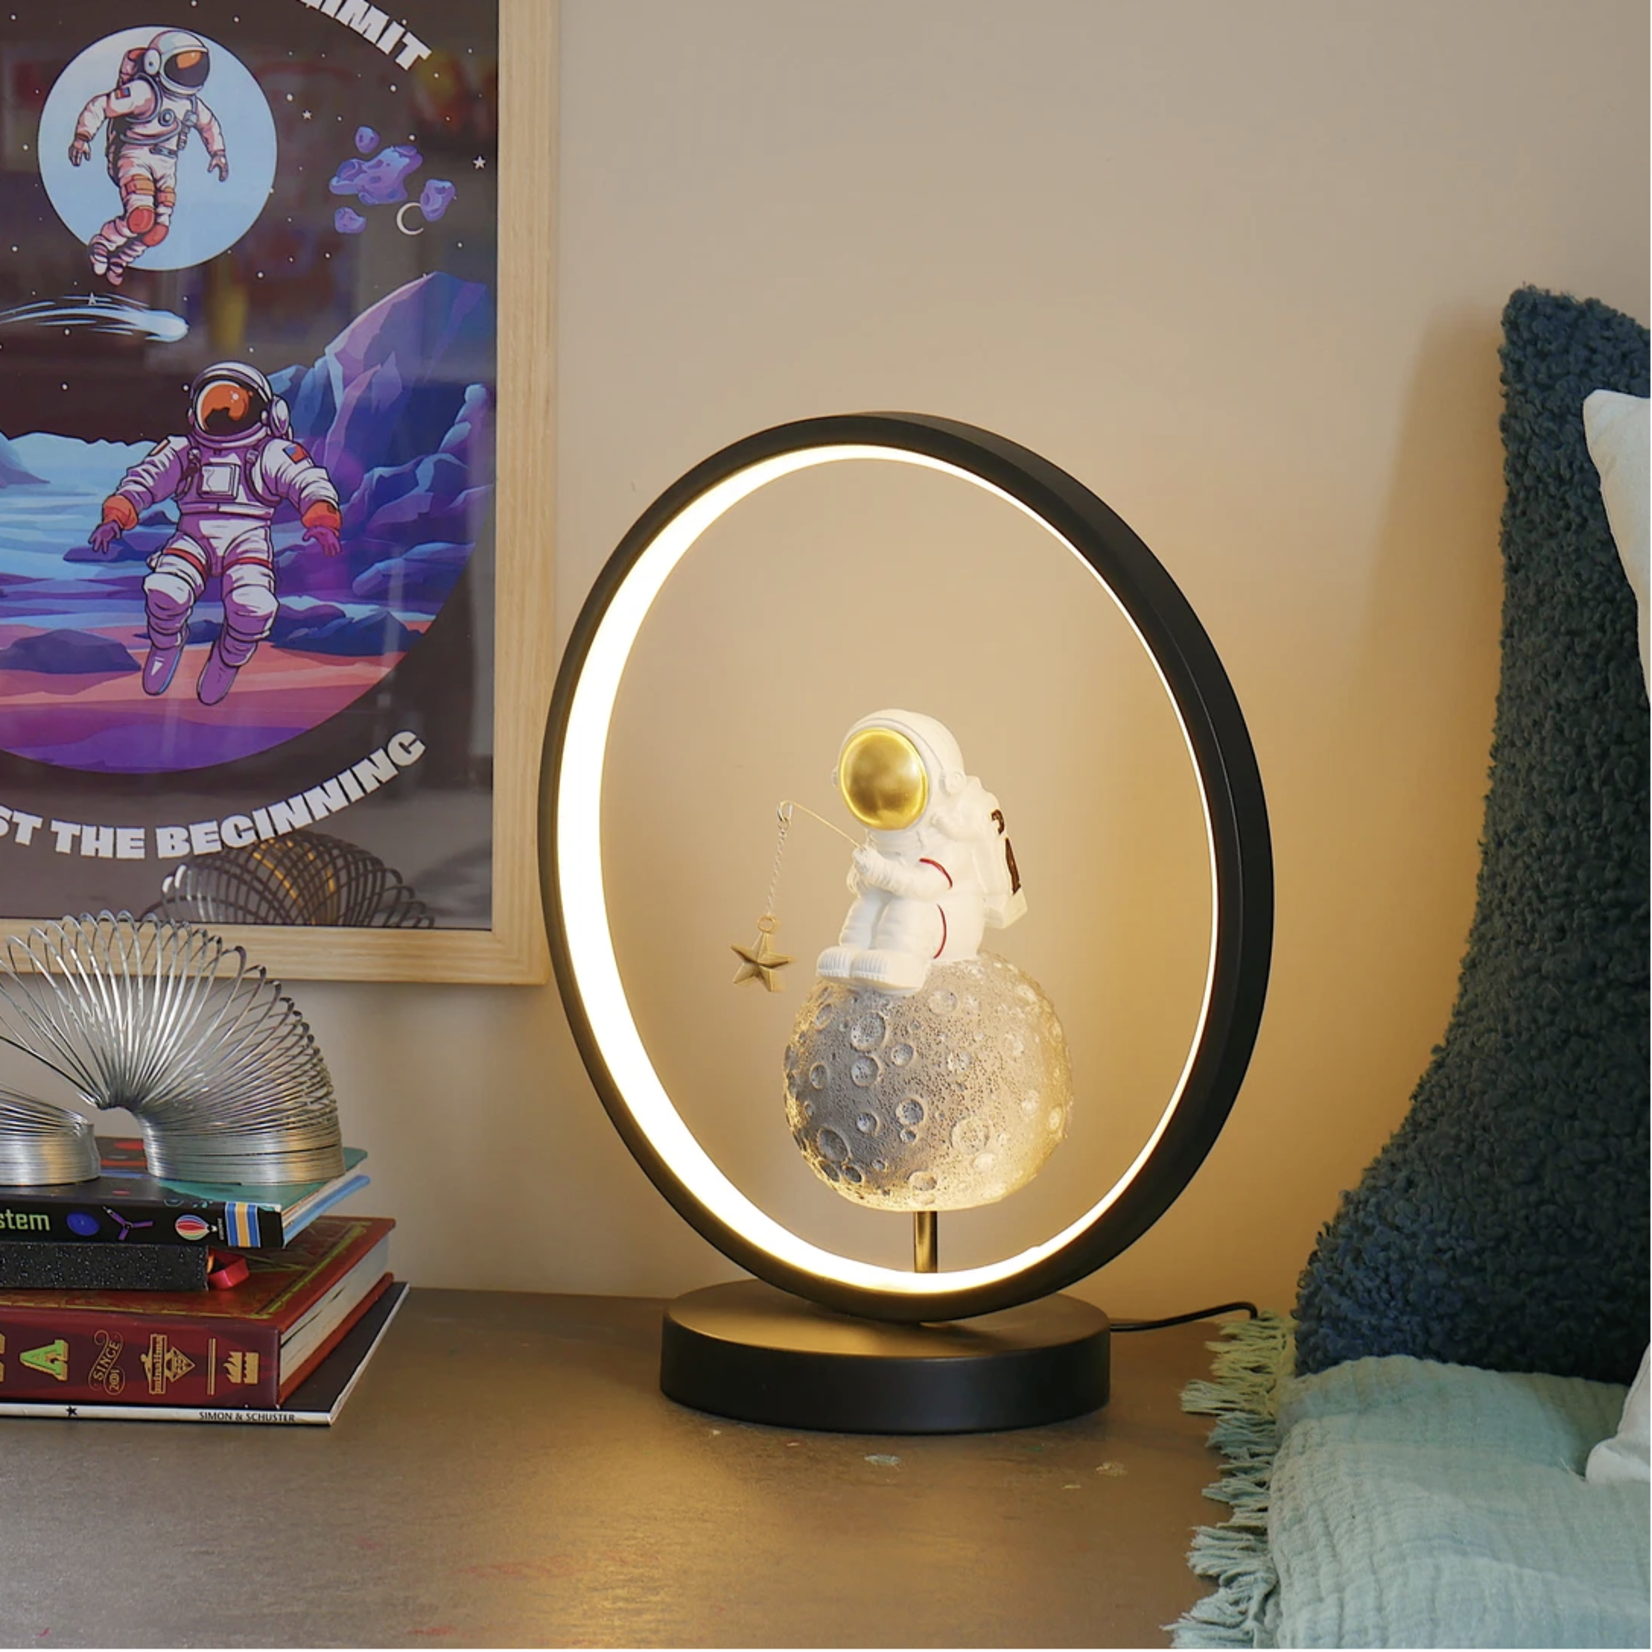 Steepletone Ultra Cool Moon Astronaut Catching a Star figurine LED Ring Light